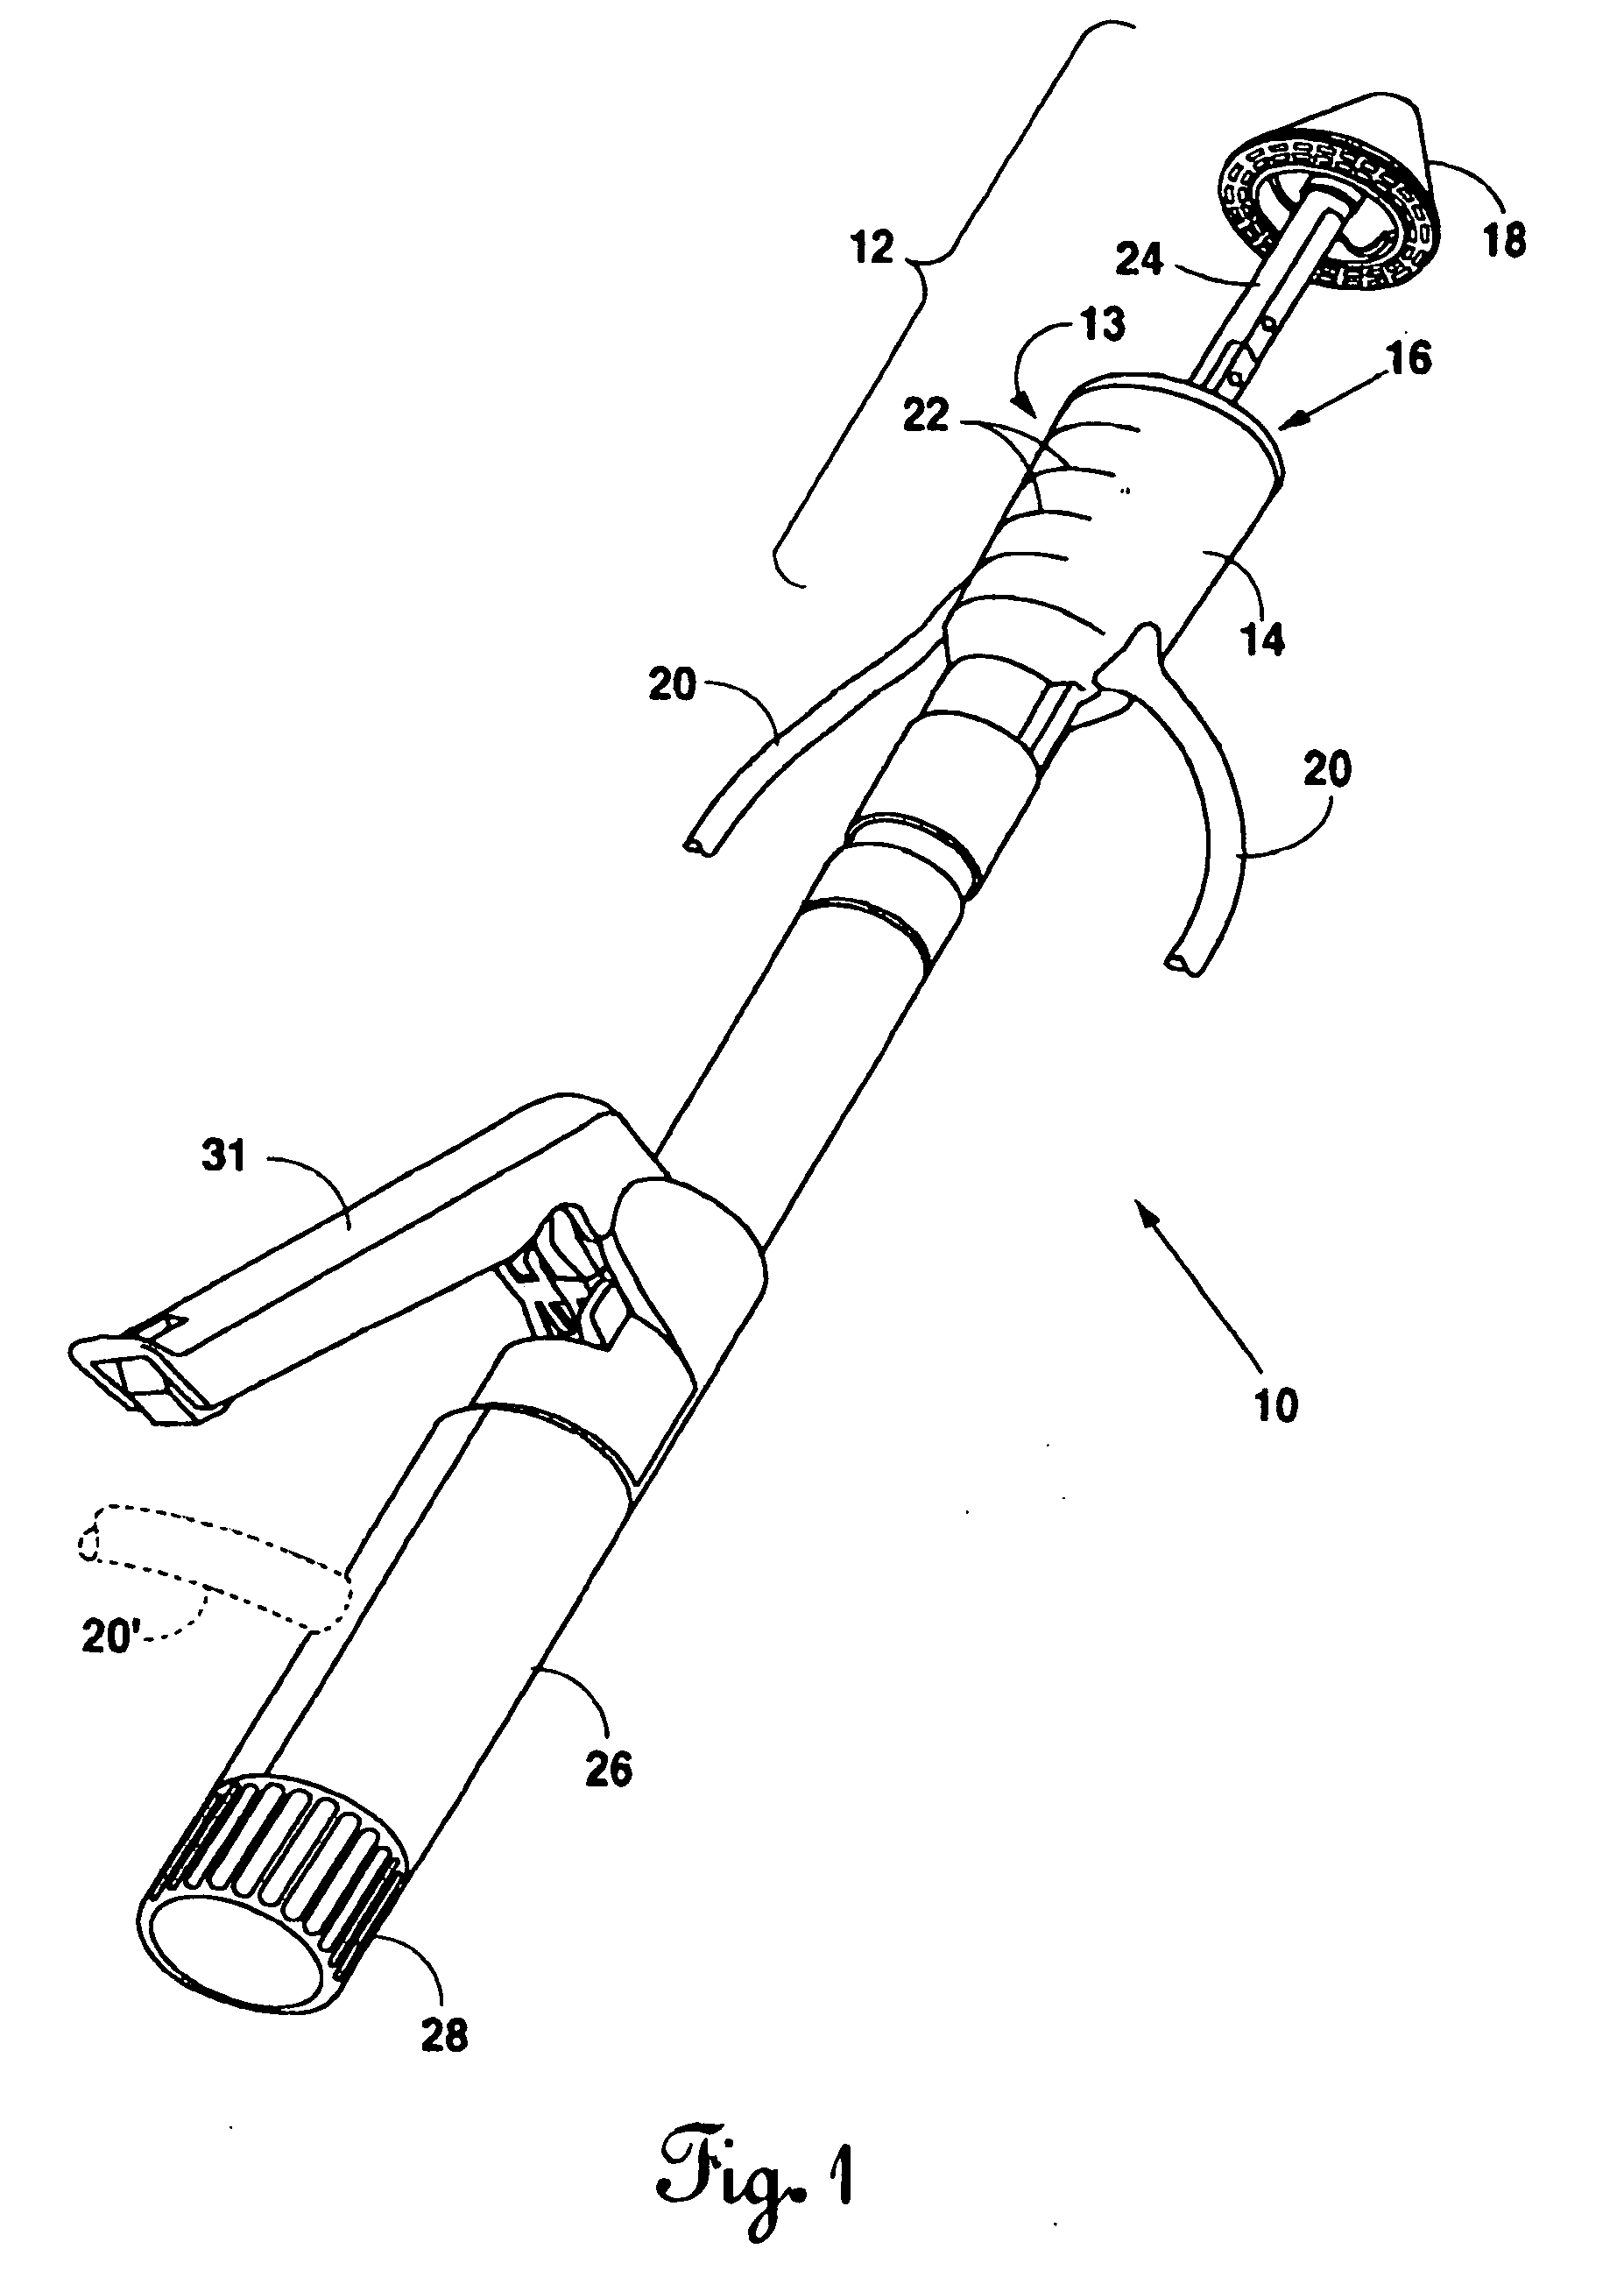 Apparatus and method of use of a circular surgical stapler